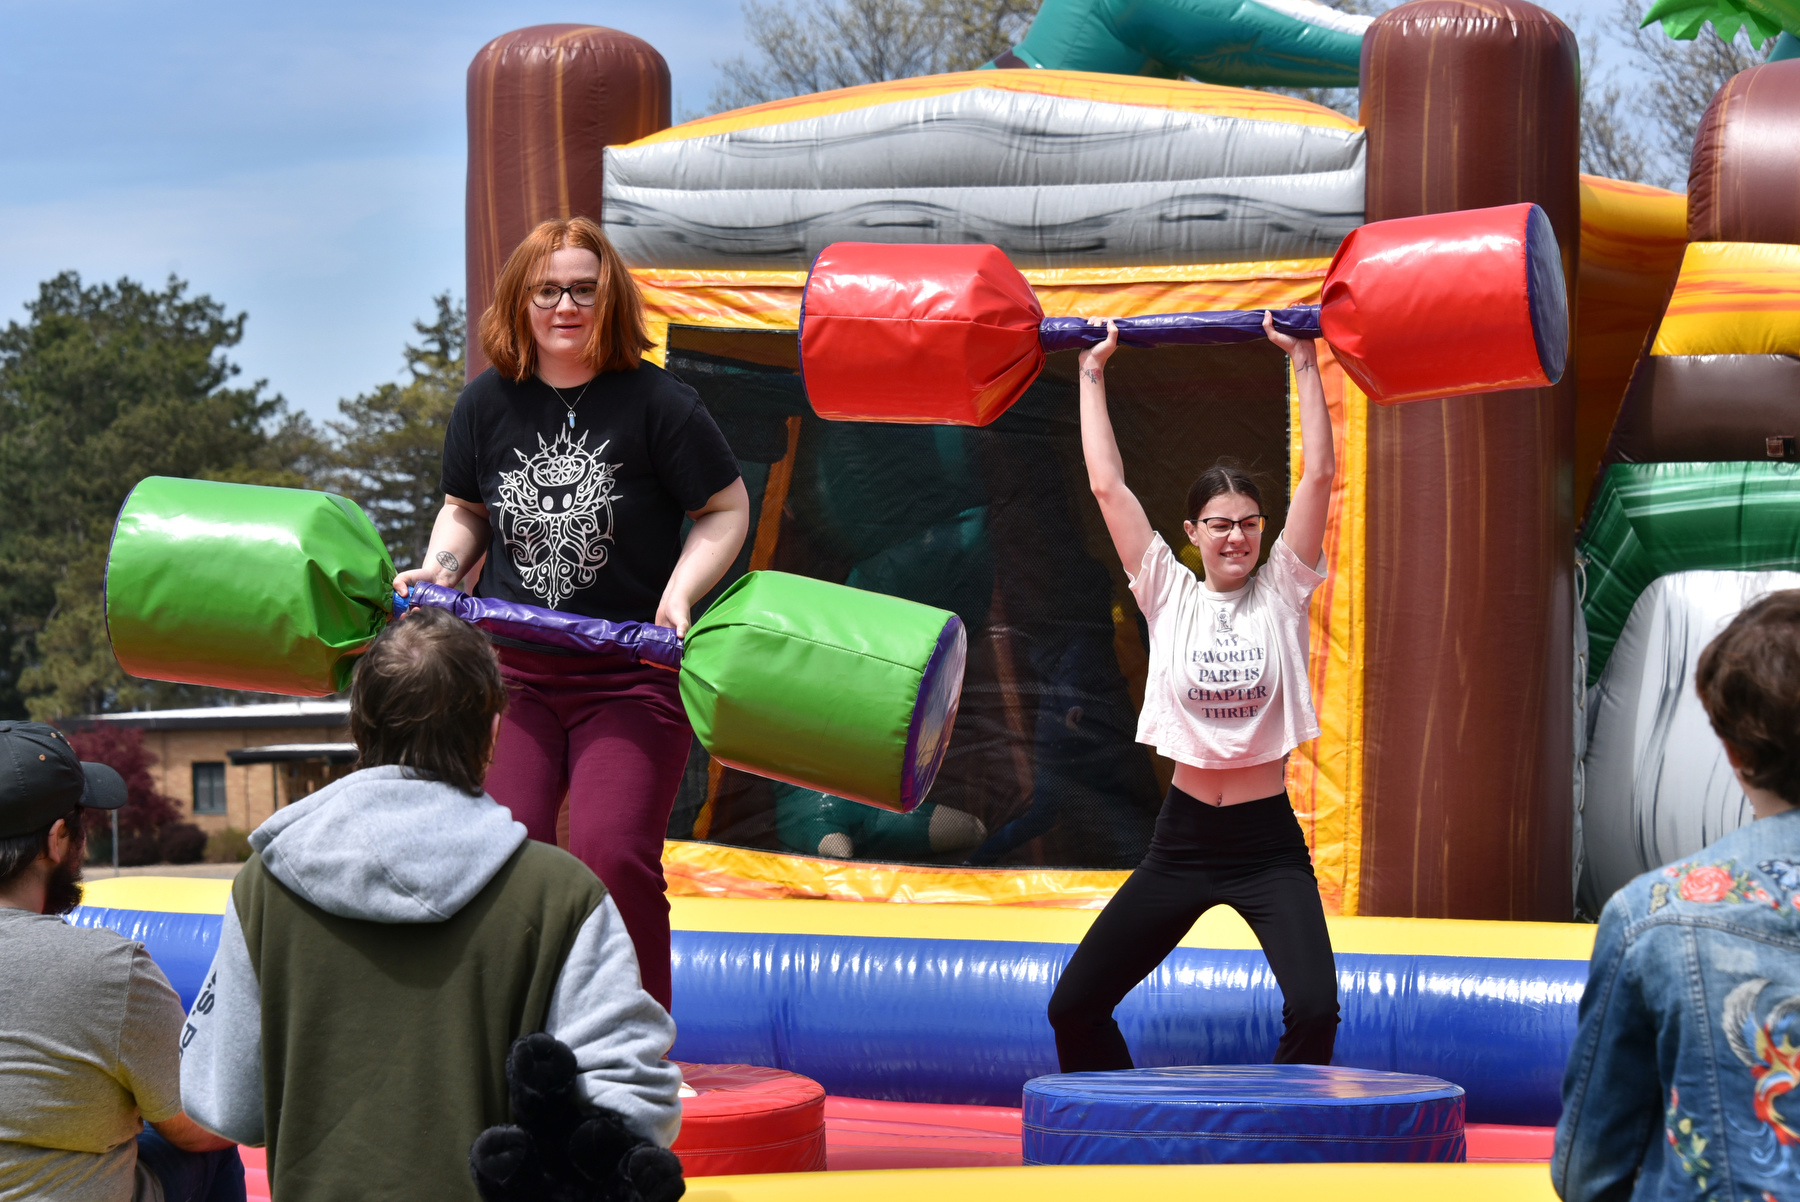 During the May 5 OzFest, Jenna Carpenter (left), a senior illustration major, and Alyssa Curling, a graduate mental health counseling major, show off their skills in a friendly pugilistic contest.